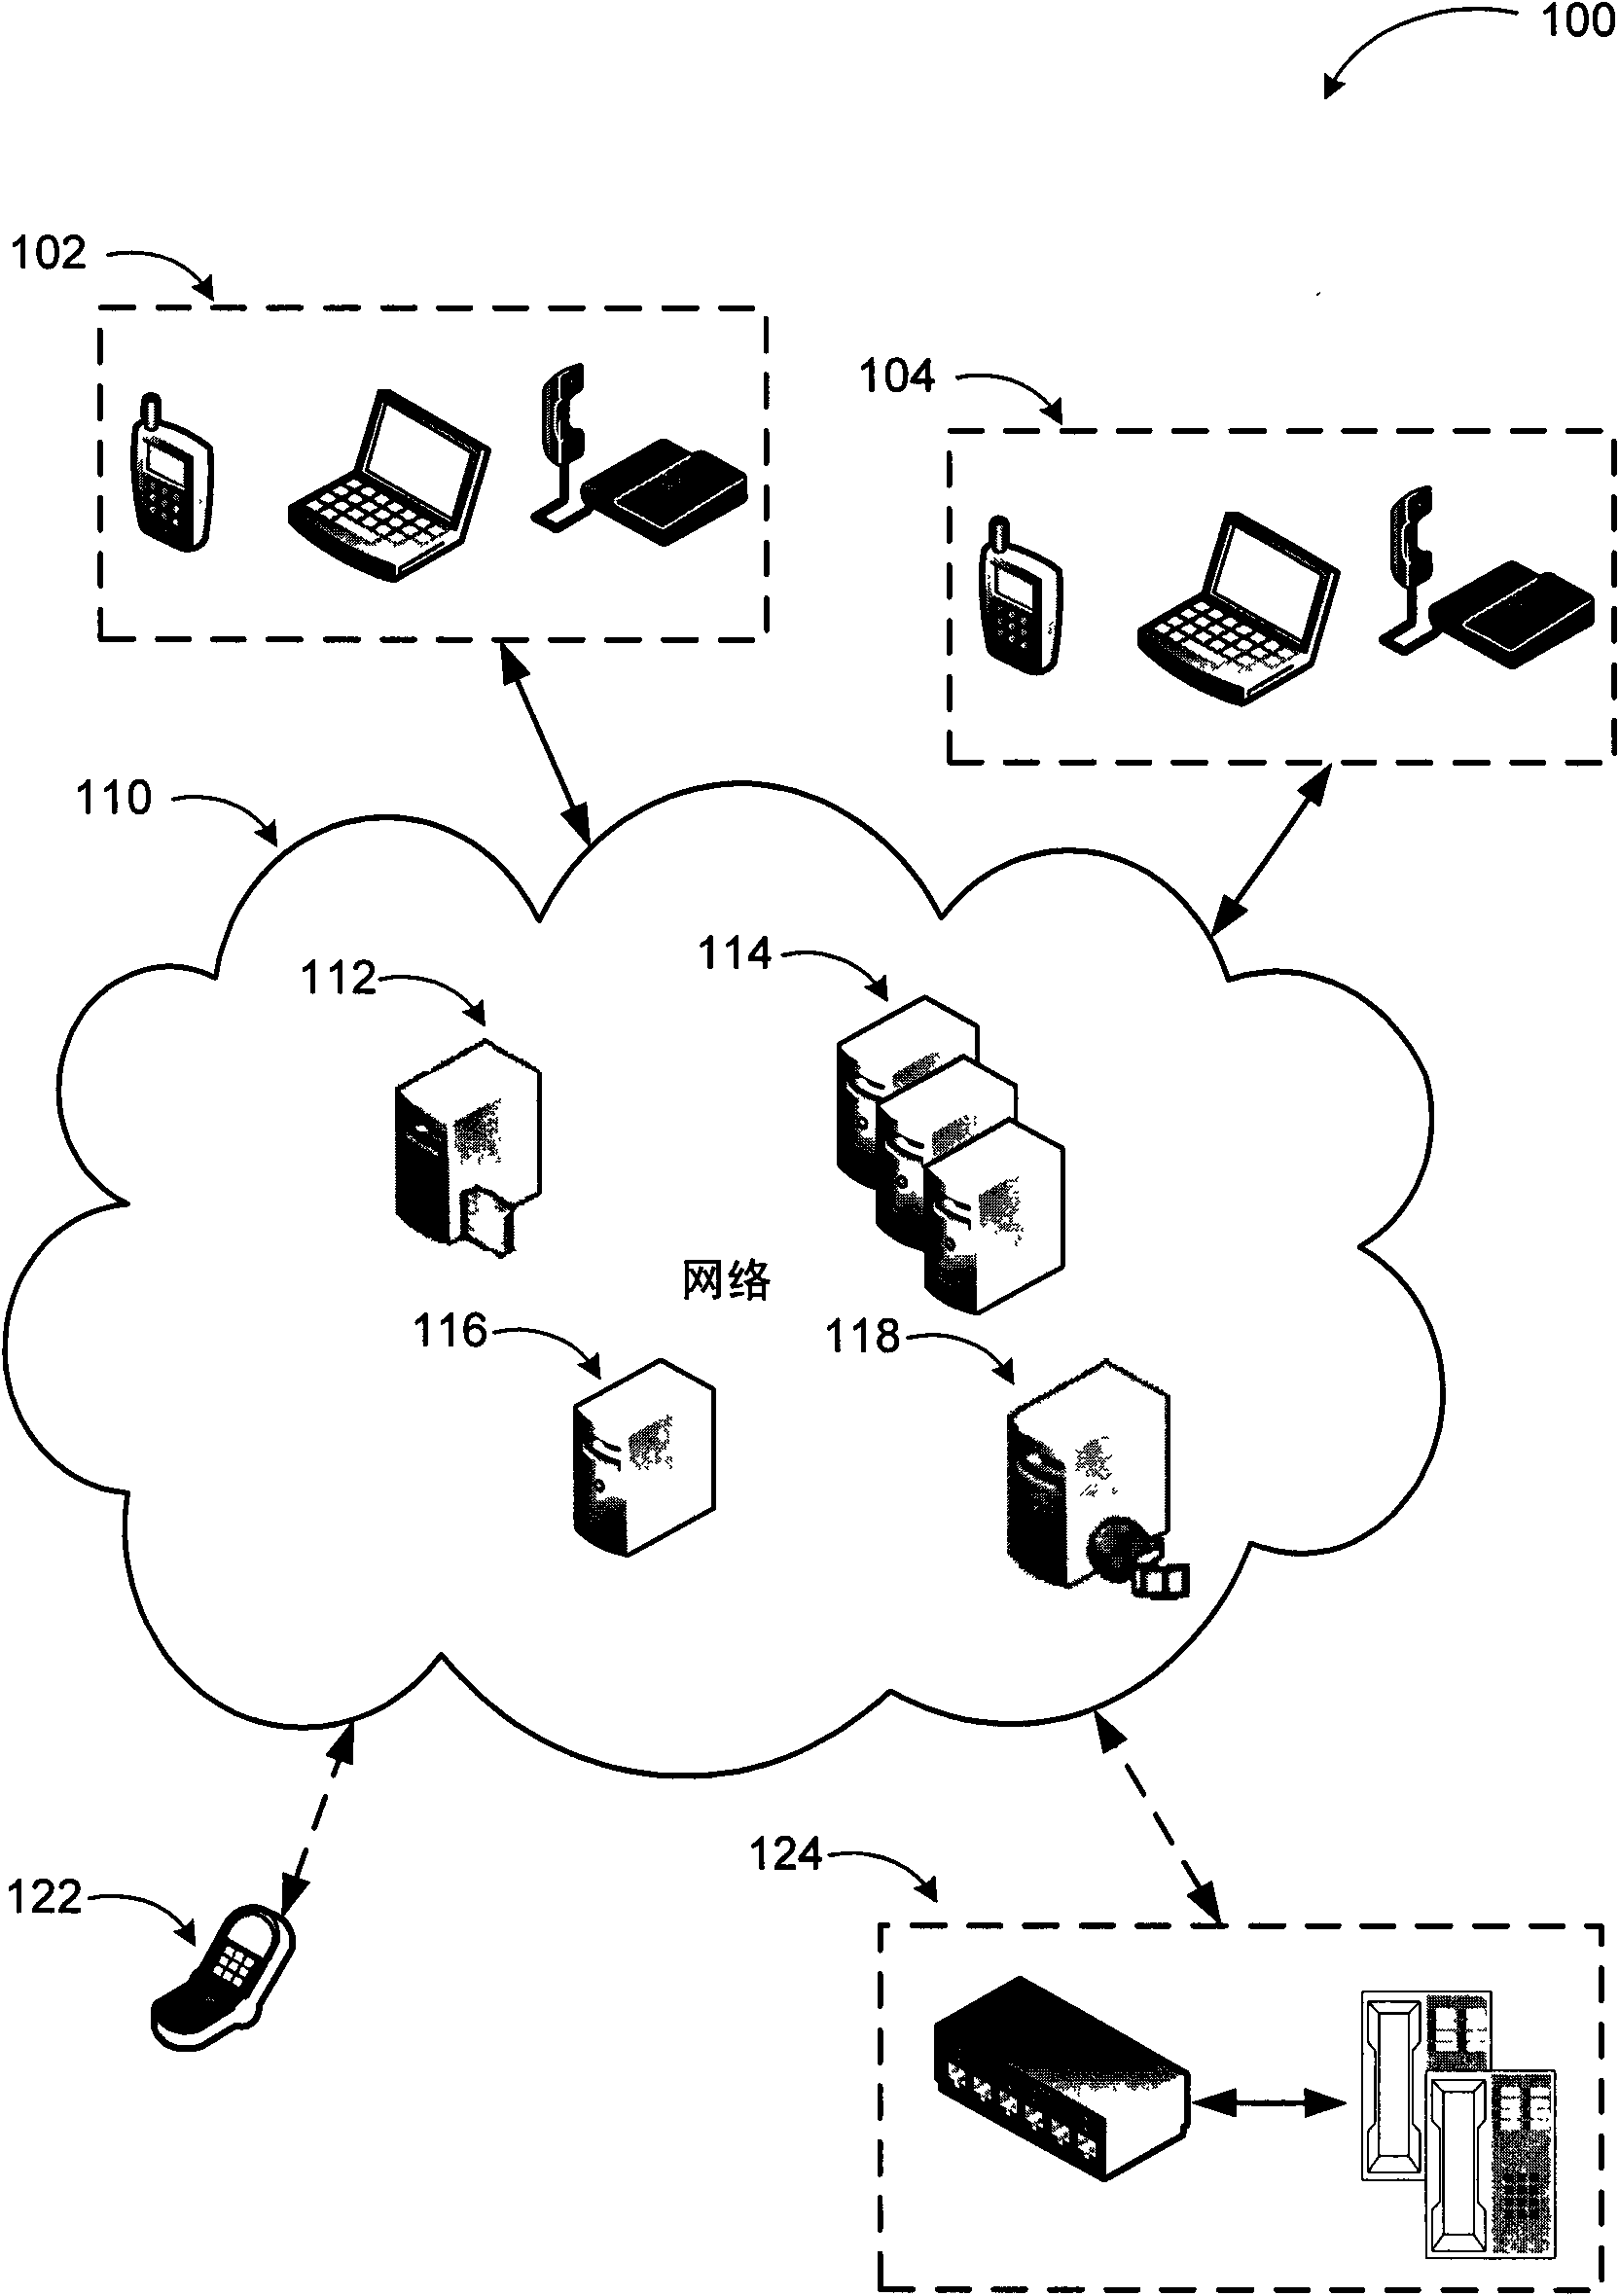 Consolidation and duplicate resolution of contact information